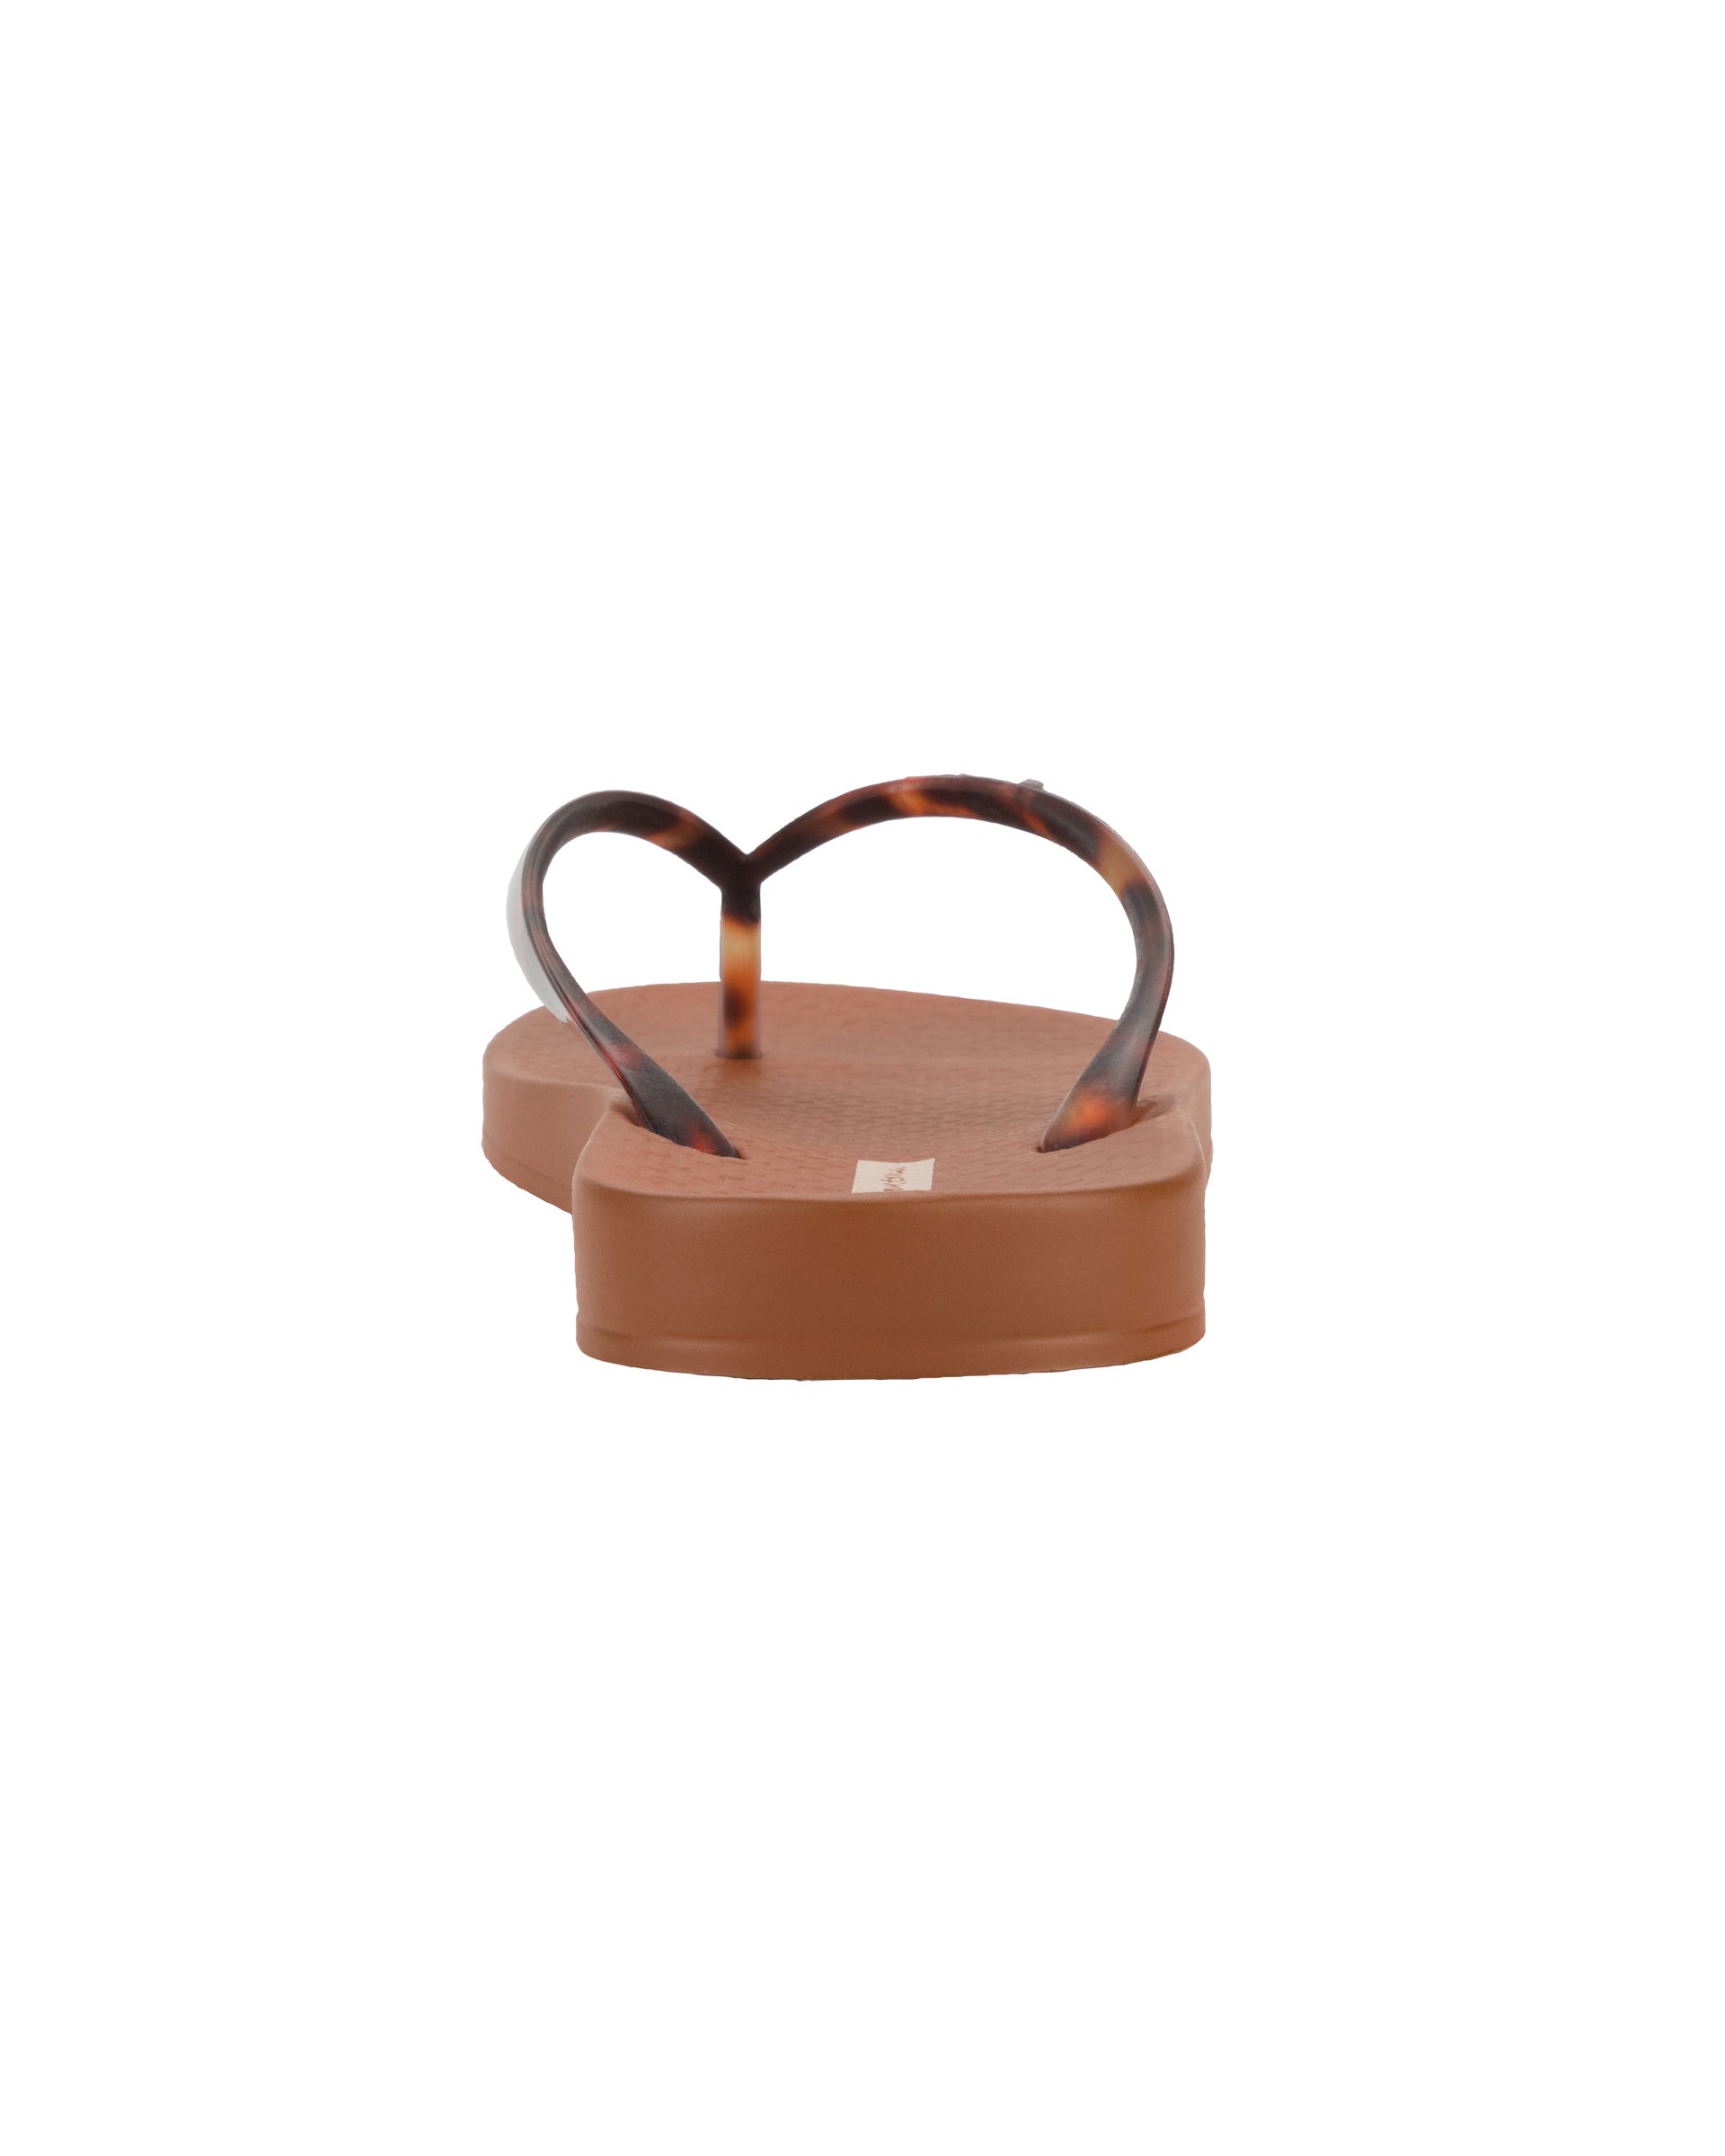 Back view of a brown Ipanema Ana Connect women's flip flop with brown tortoiseshell  color strap.